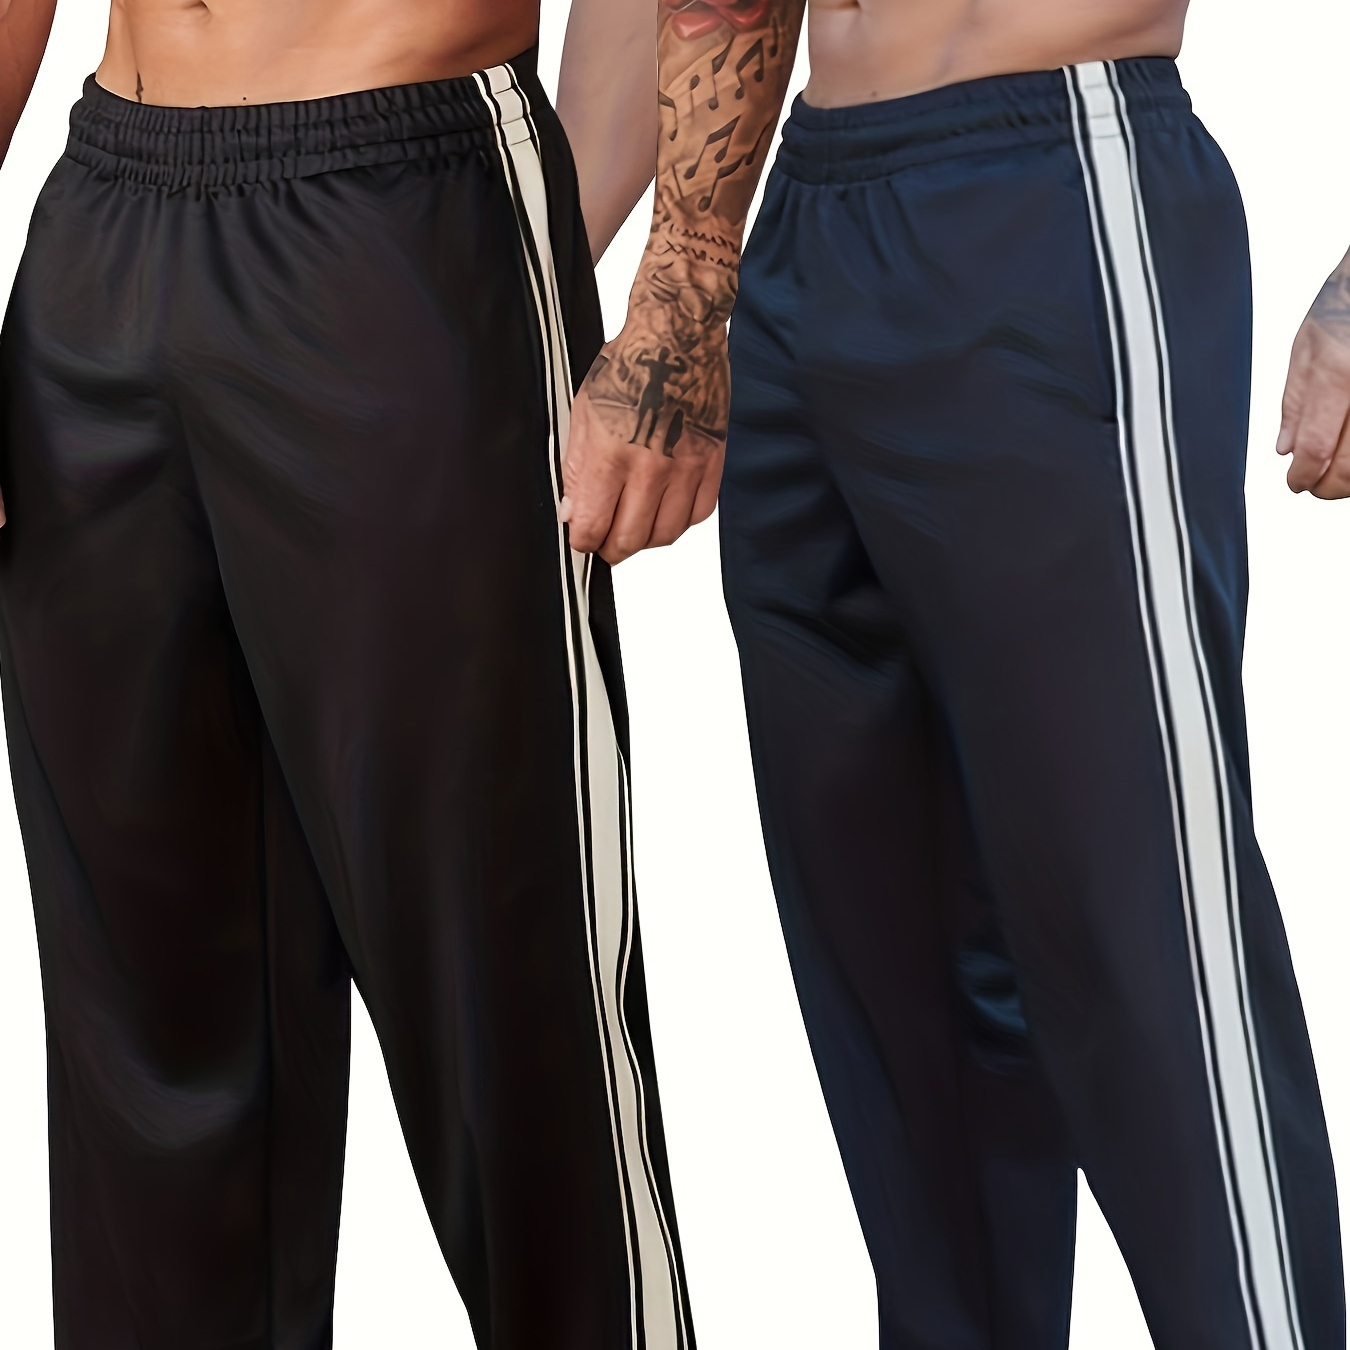 

Men's 2-pack Set Of Contrast Color Stripe Pattern Loose Fit Baggy Sweatpants With Drawstring And Pockets, Versatile And Chic Trousers For Men's Sports And Daily Wear